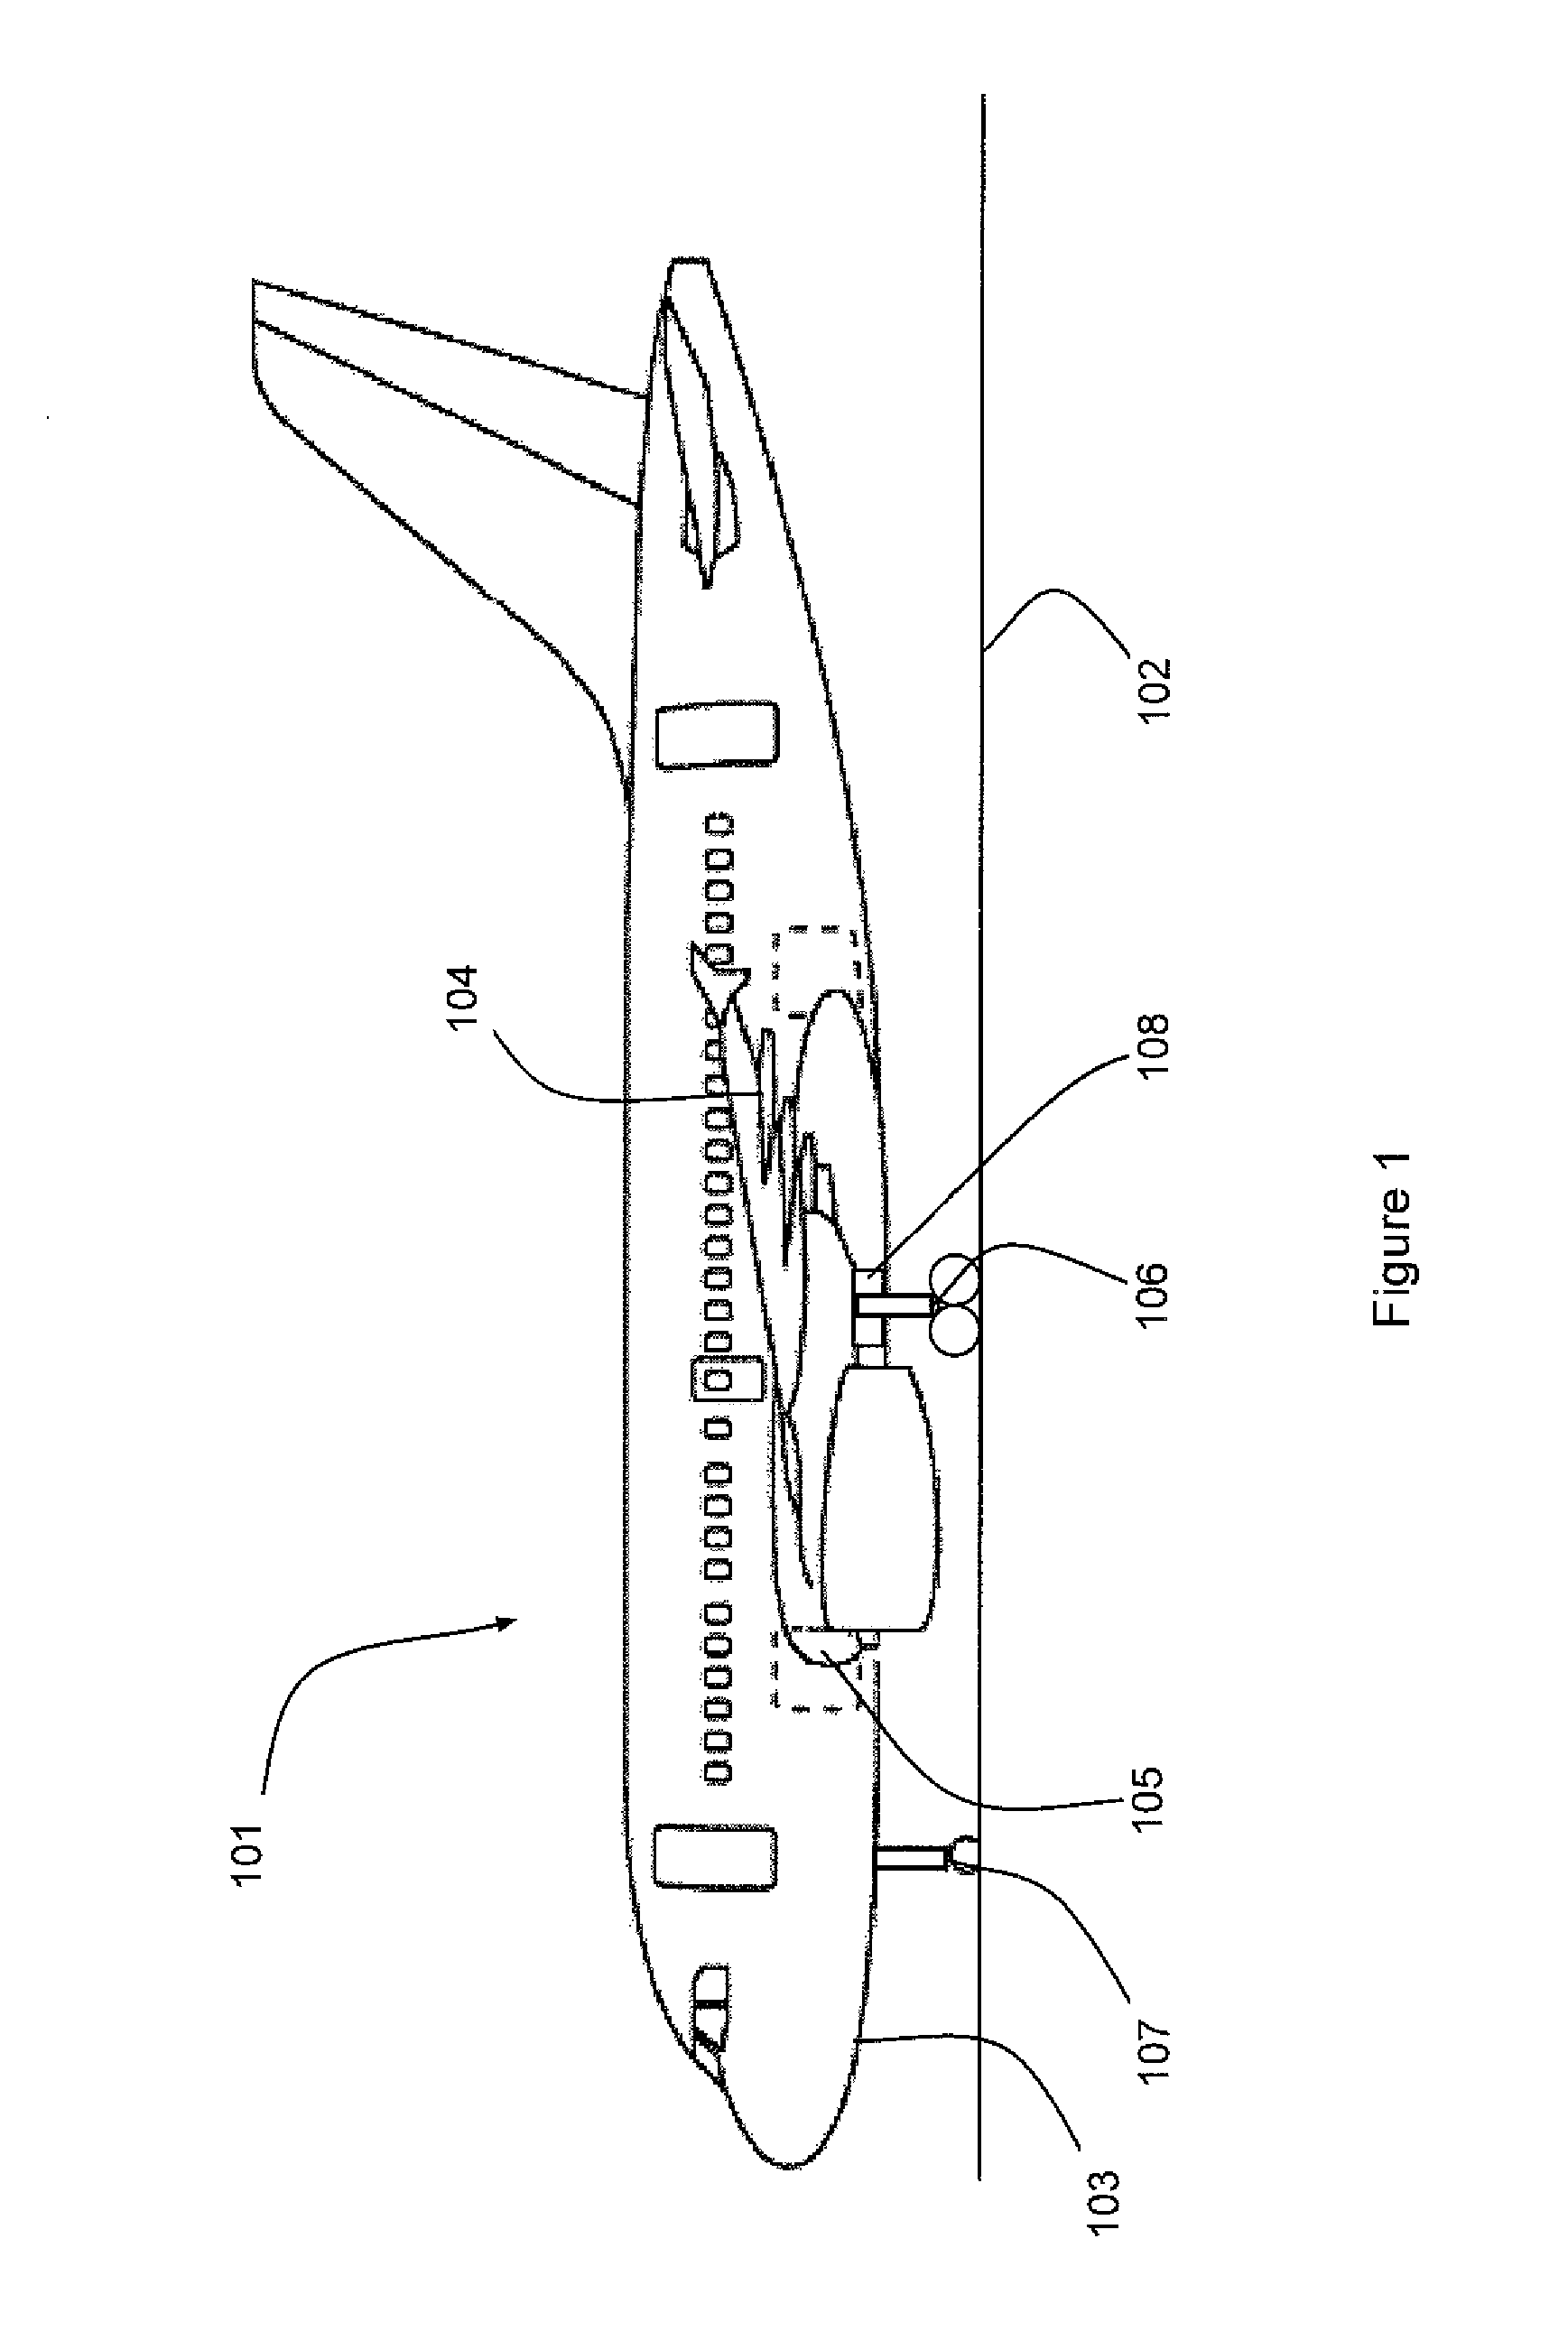 Door for opening and closing a door aperture in an aircraft